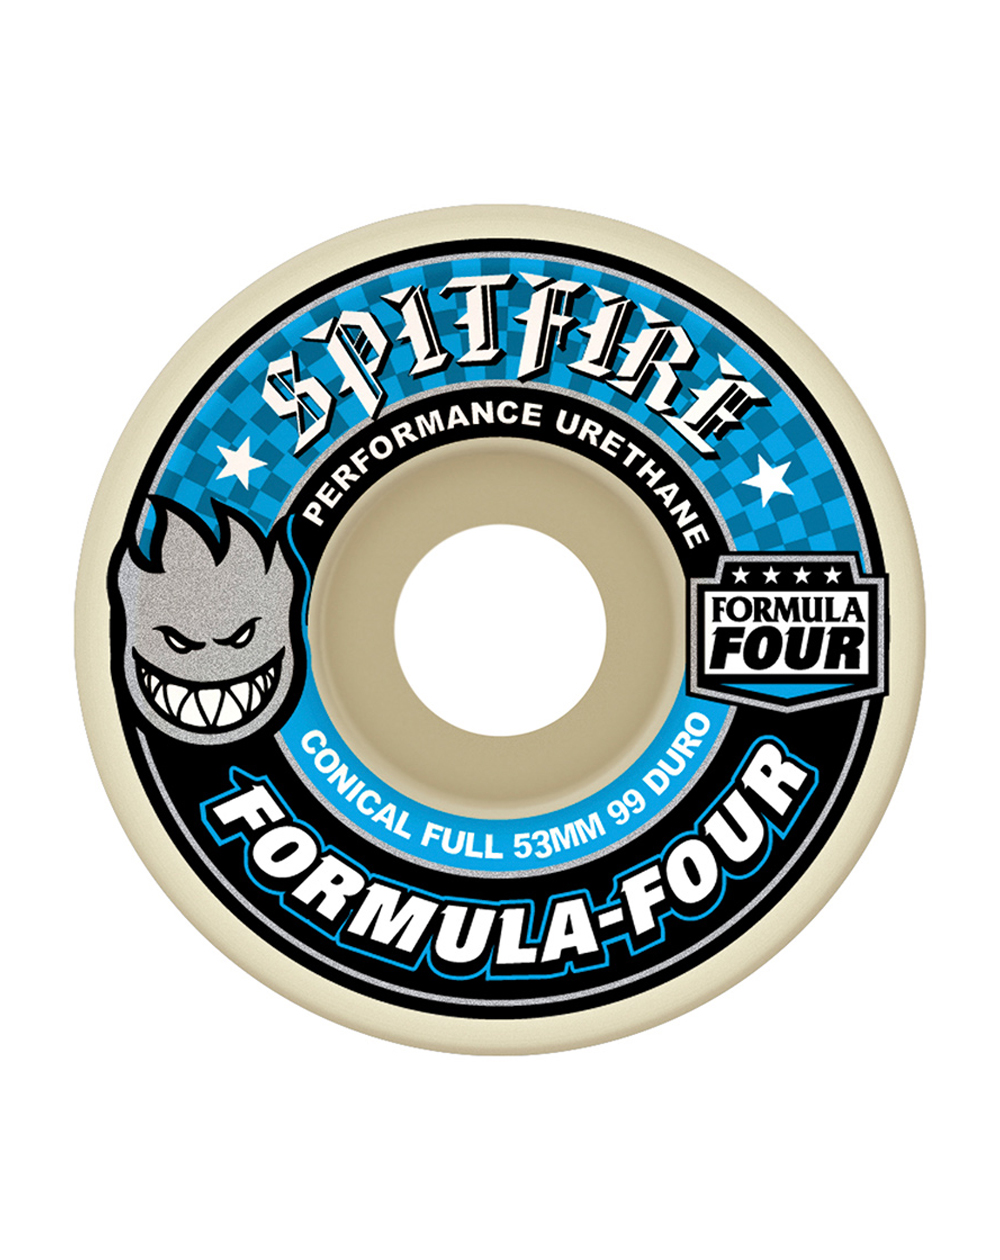 Spitfire Formula Four Conical Full 53mm 99A Skateboard Wheels pack of 4